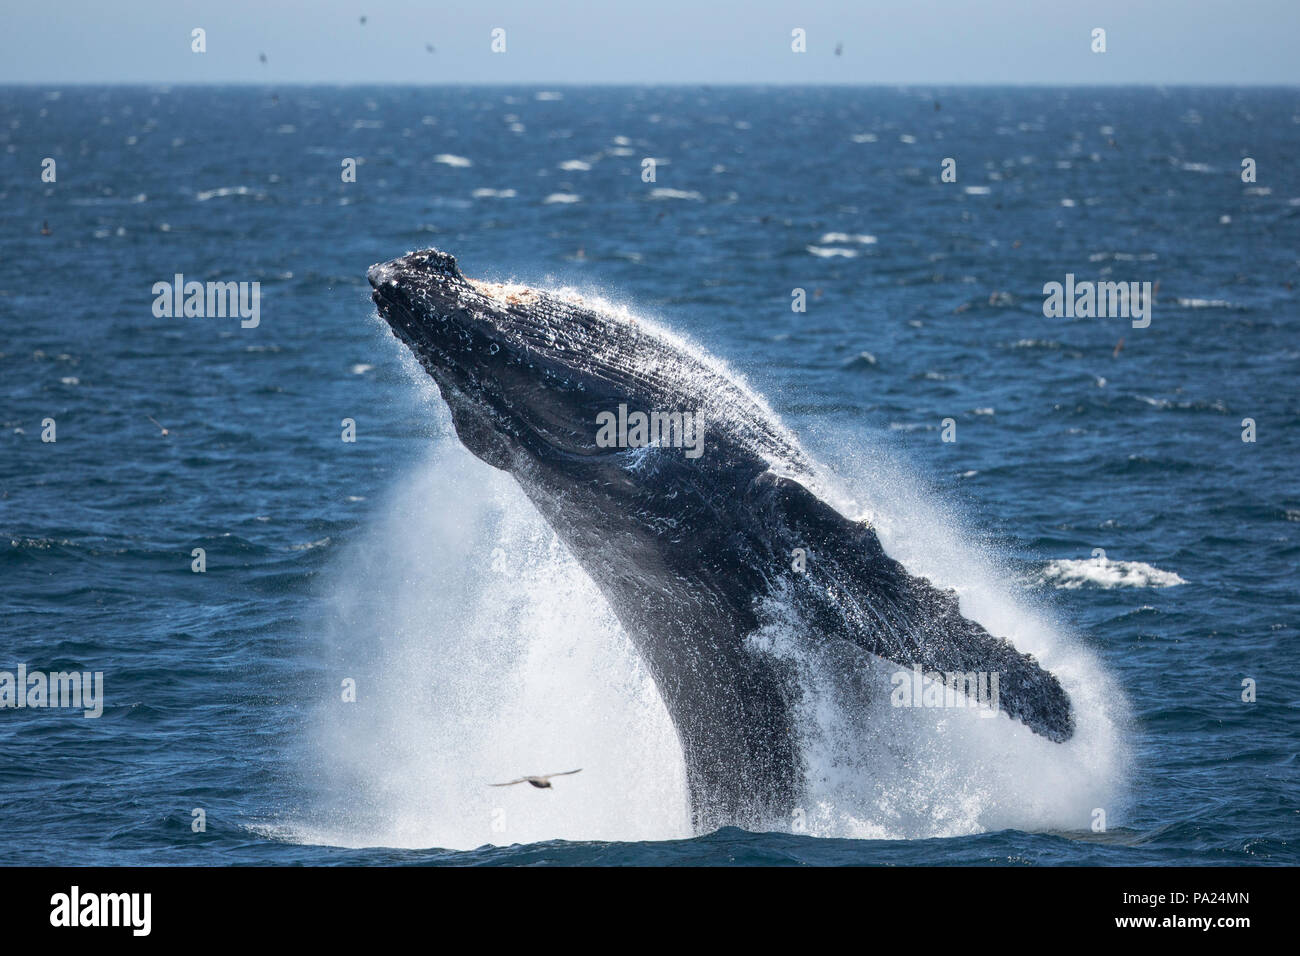 Breaching Humpback Whale, North Pacific Stock Photo